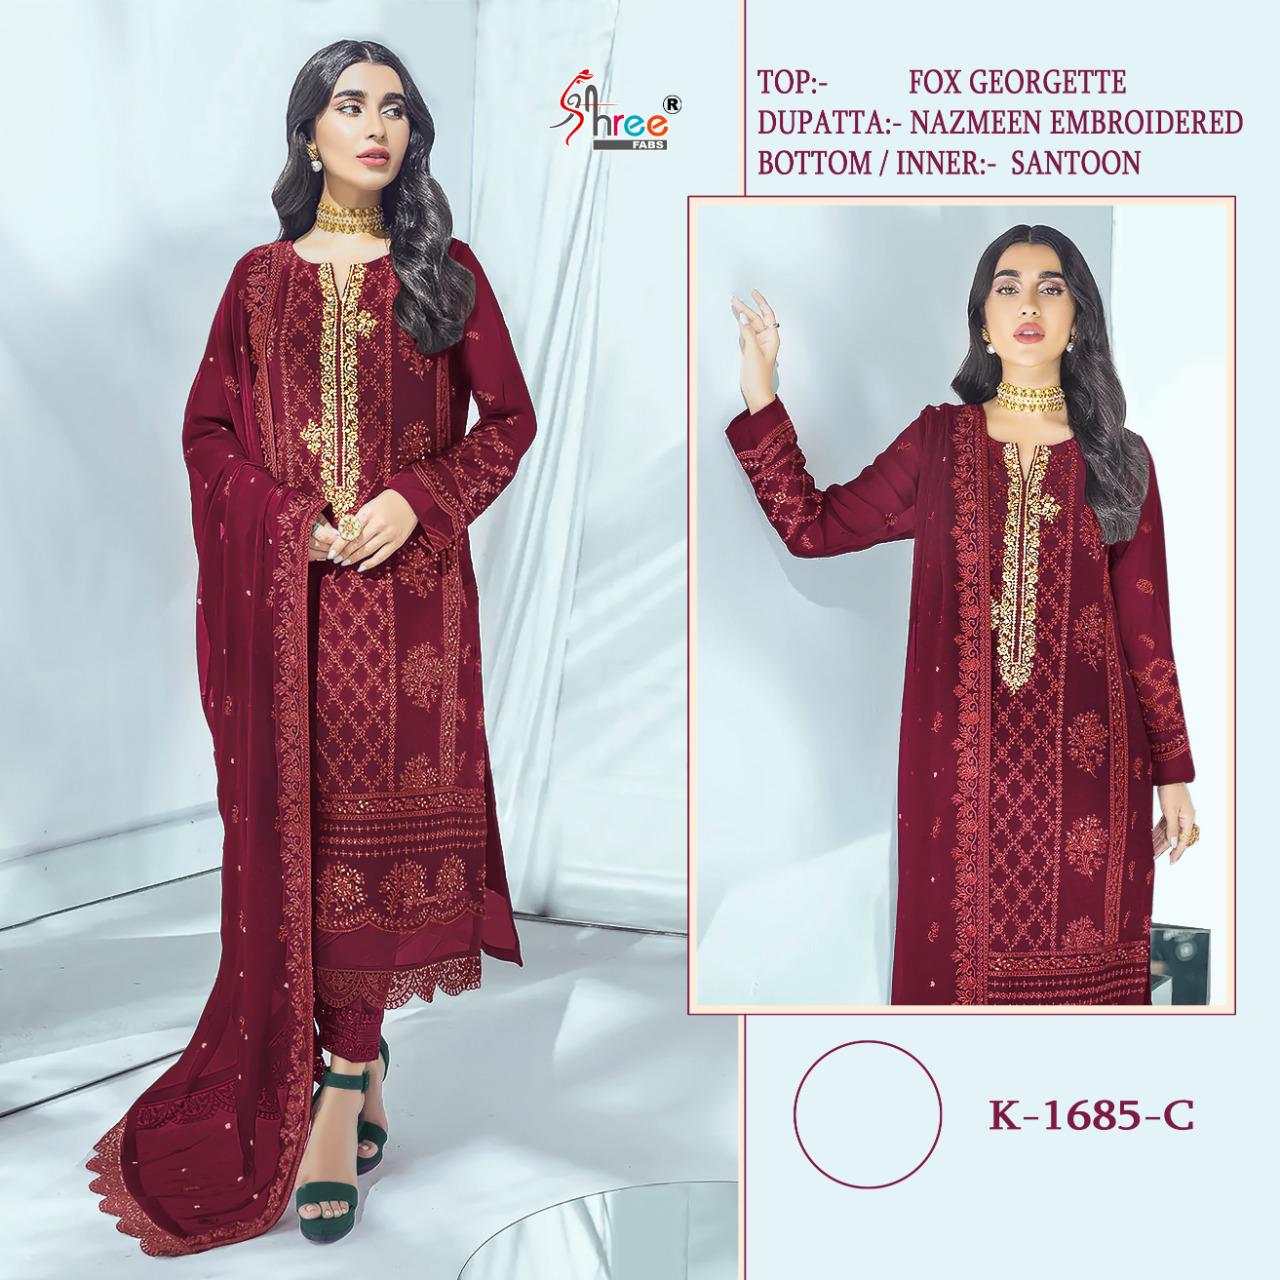 SHREE FABS K 1685 C PAKISTANI SUITS IN INDIA